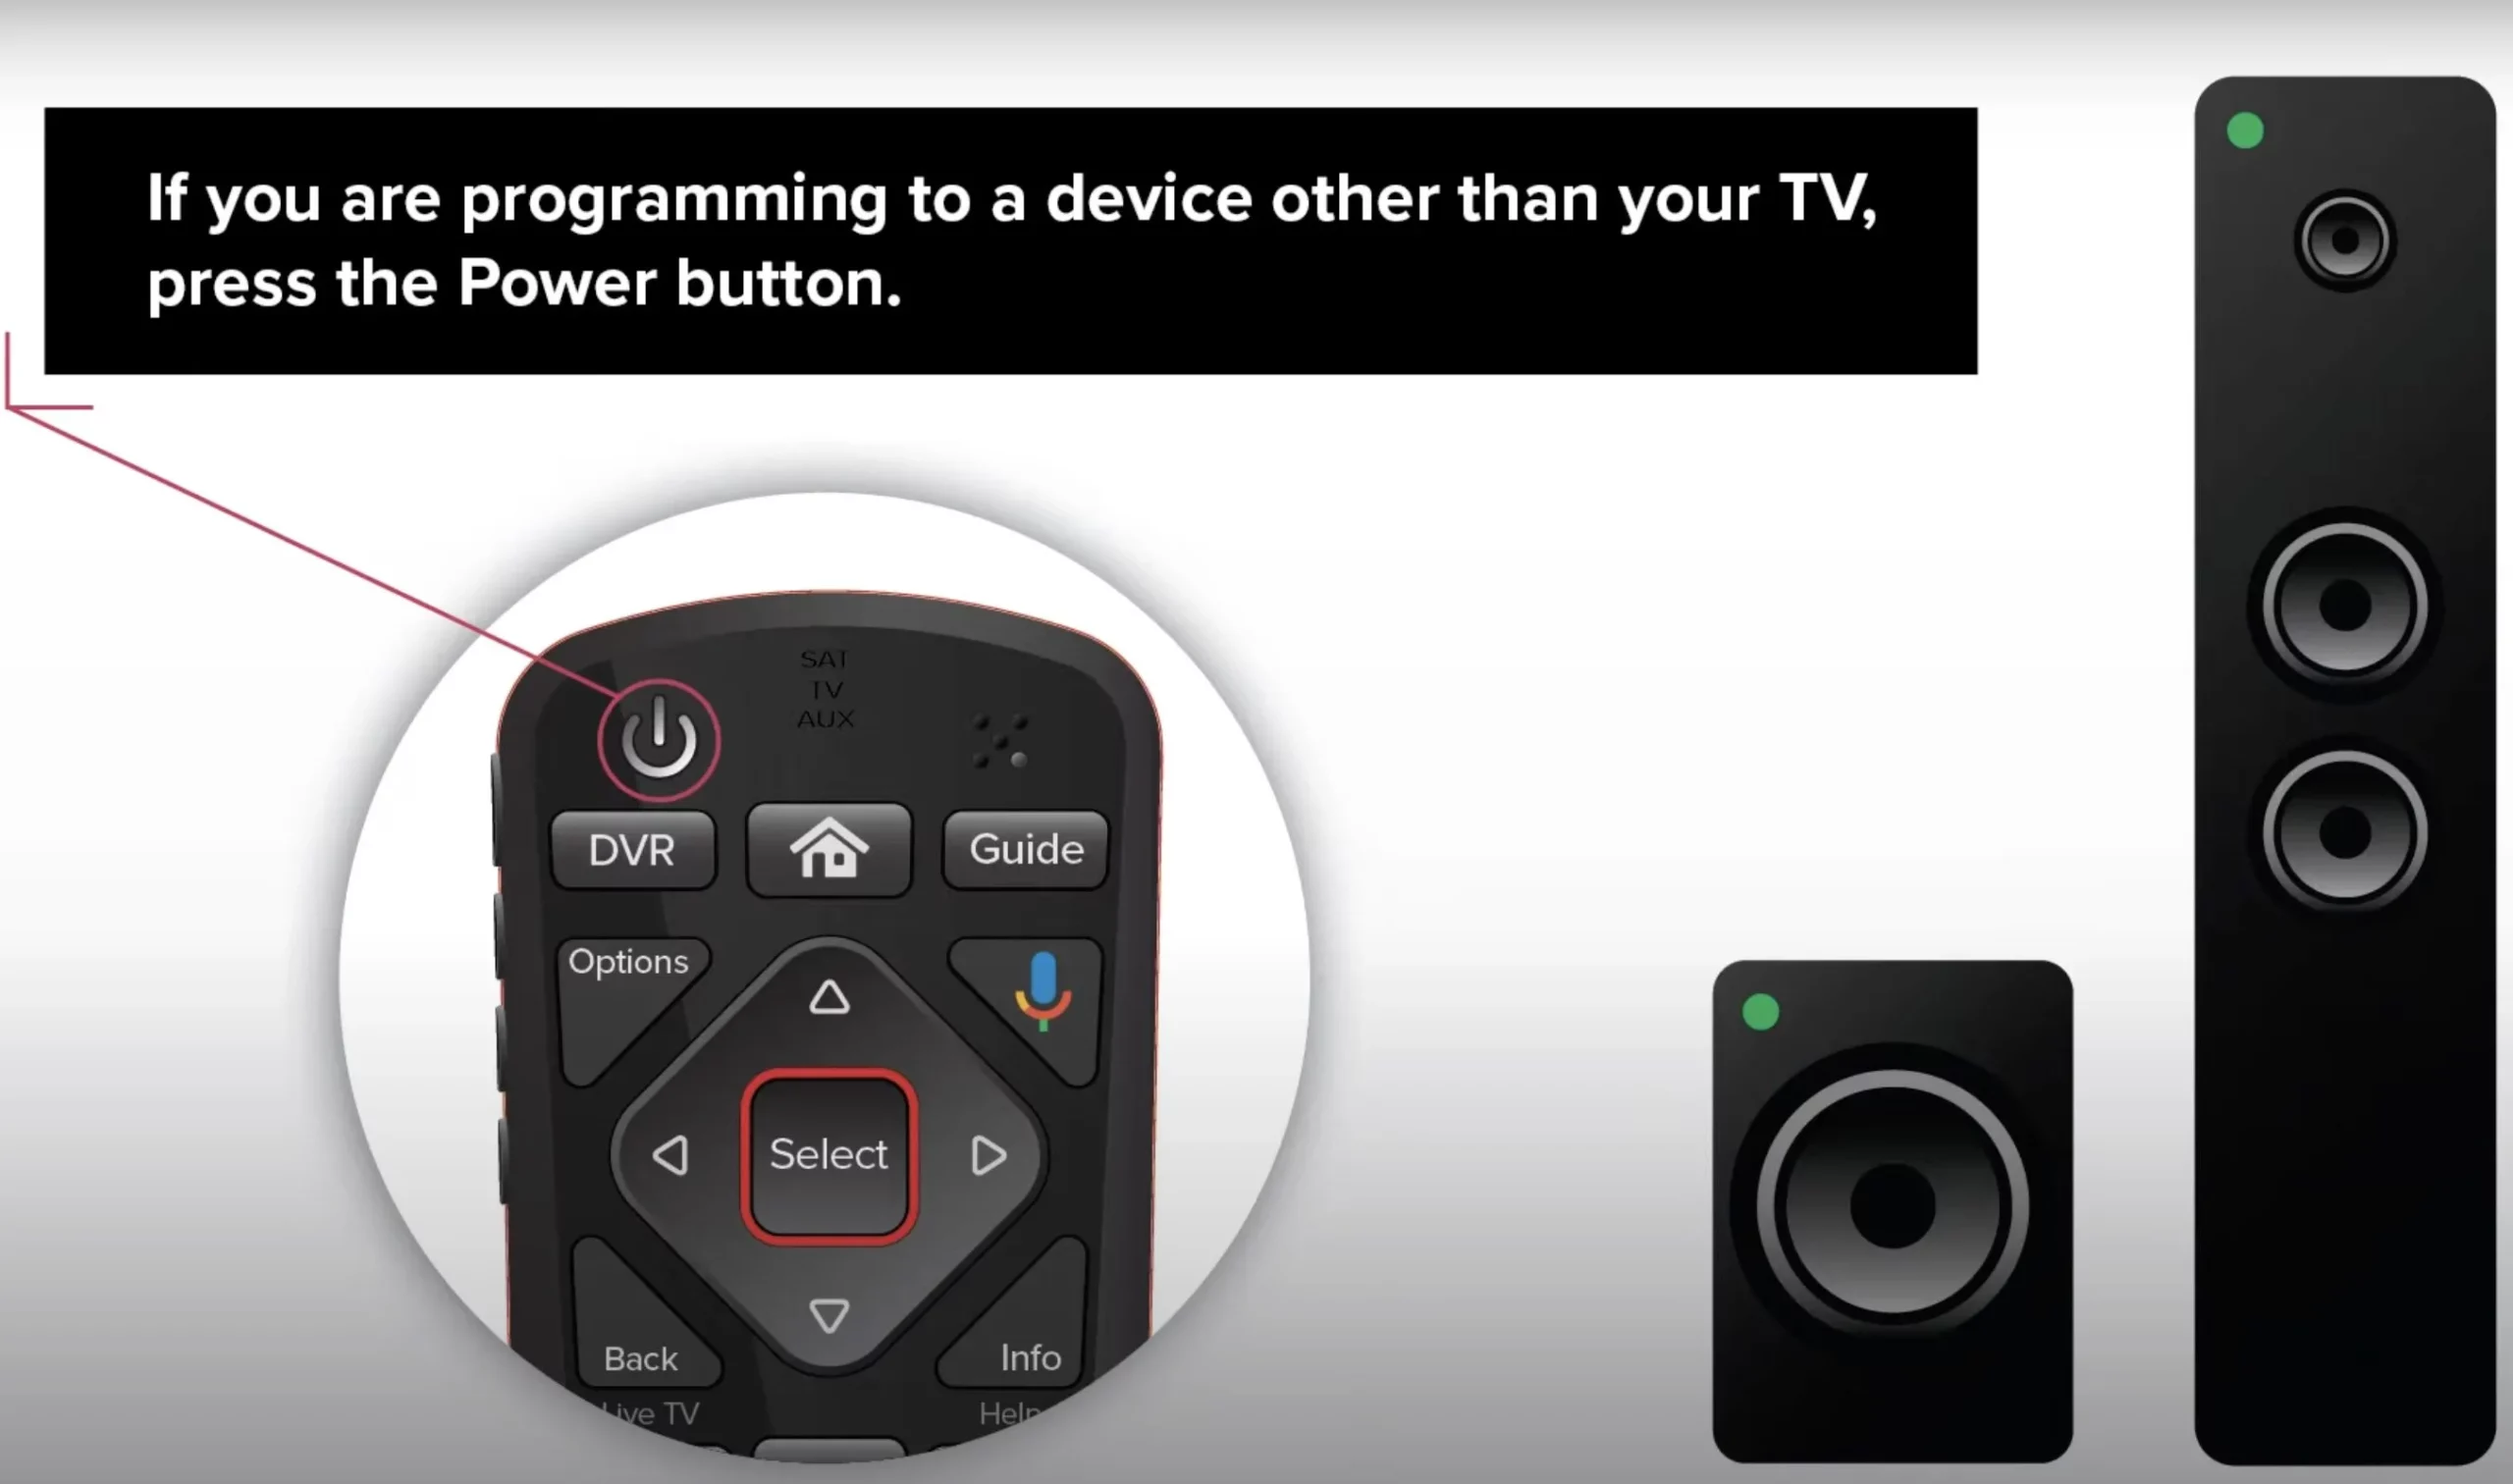 Press the Power button on your Dish Remote Control if you are trying to connect it to a device that is not a TV